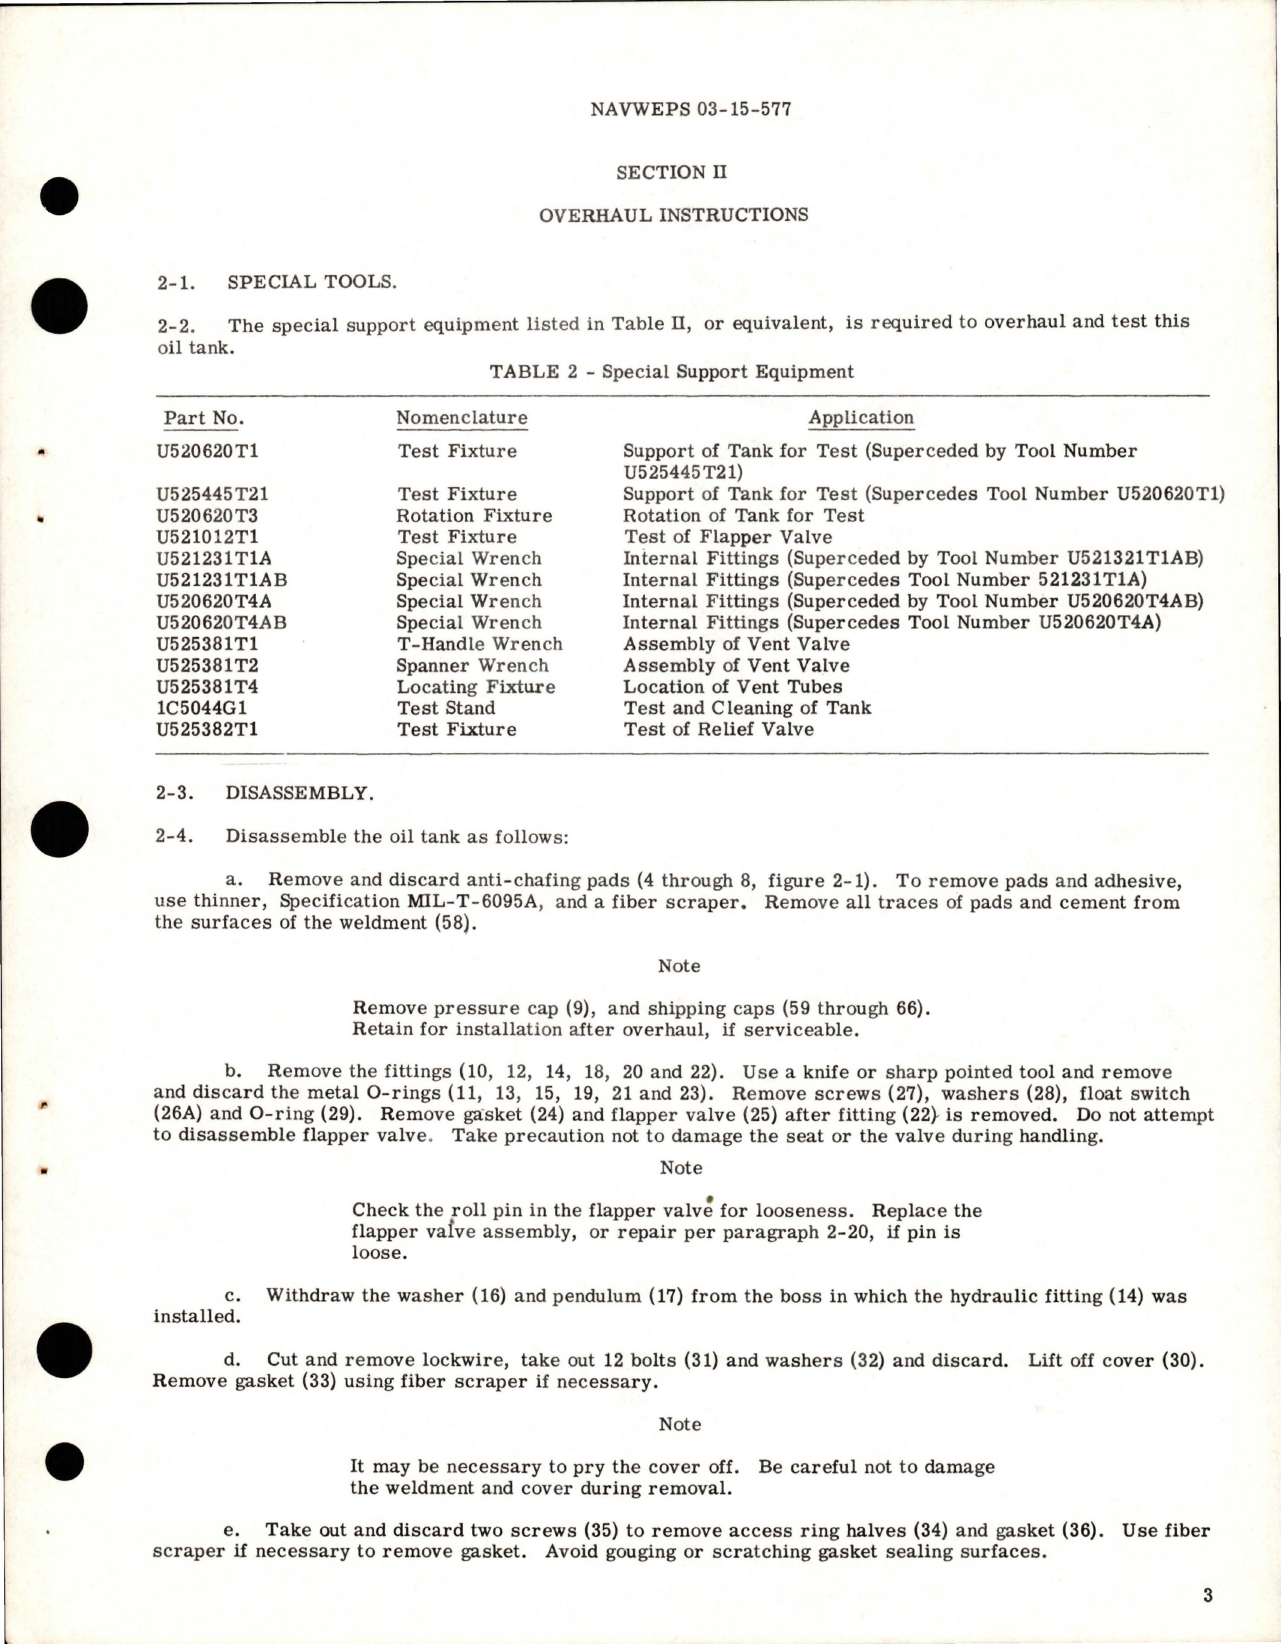 Sample page 7 from AirCorps Library document: Overhaul Instructions for Oil Tank Assembly